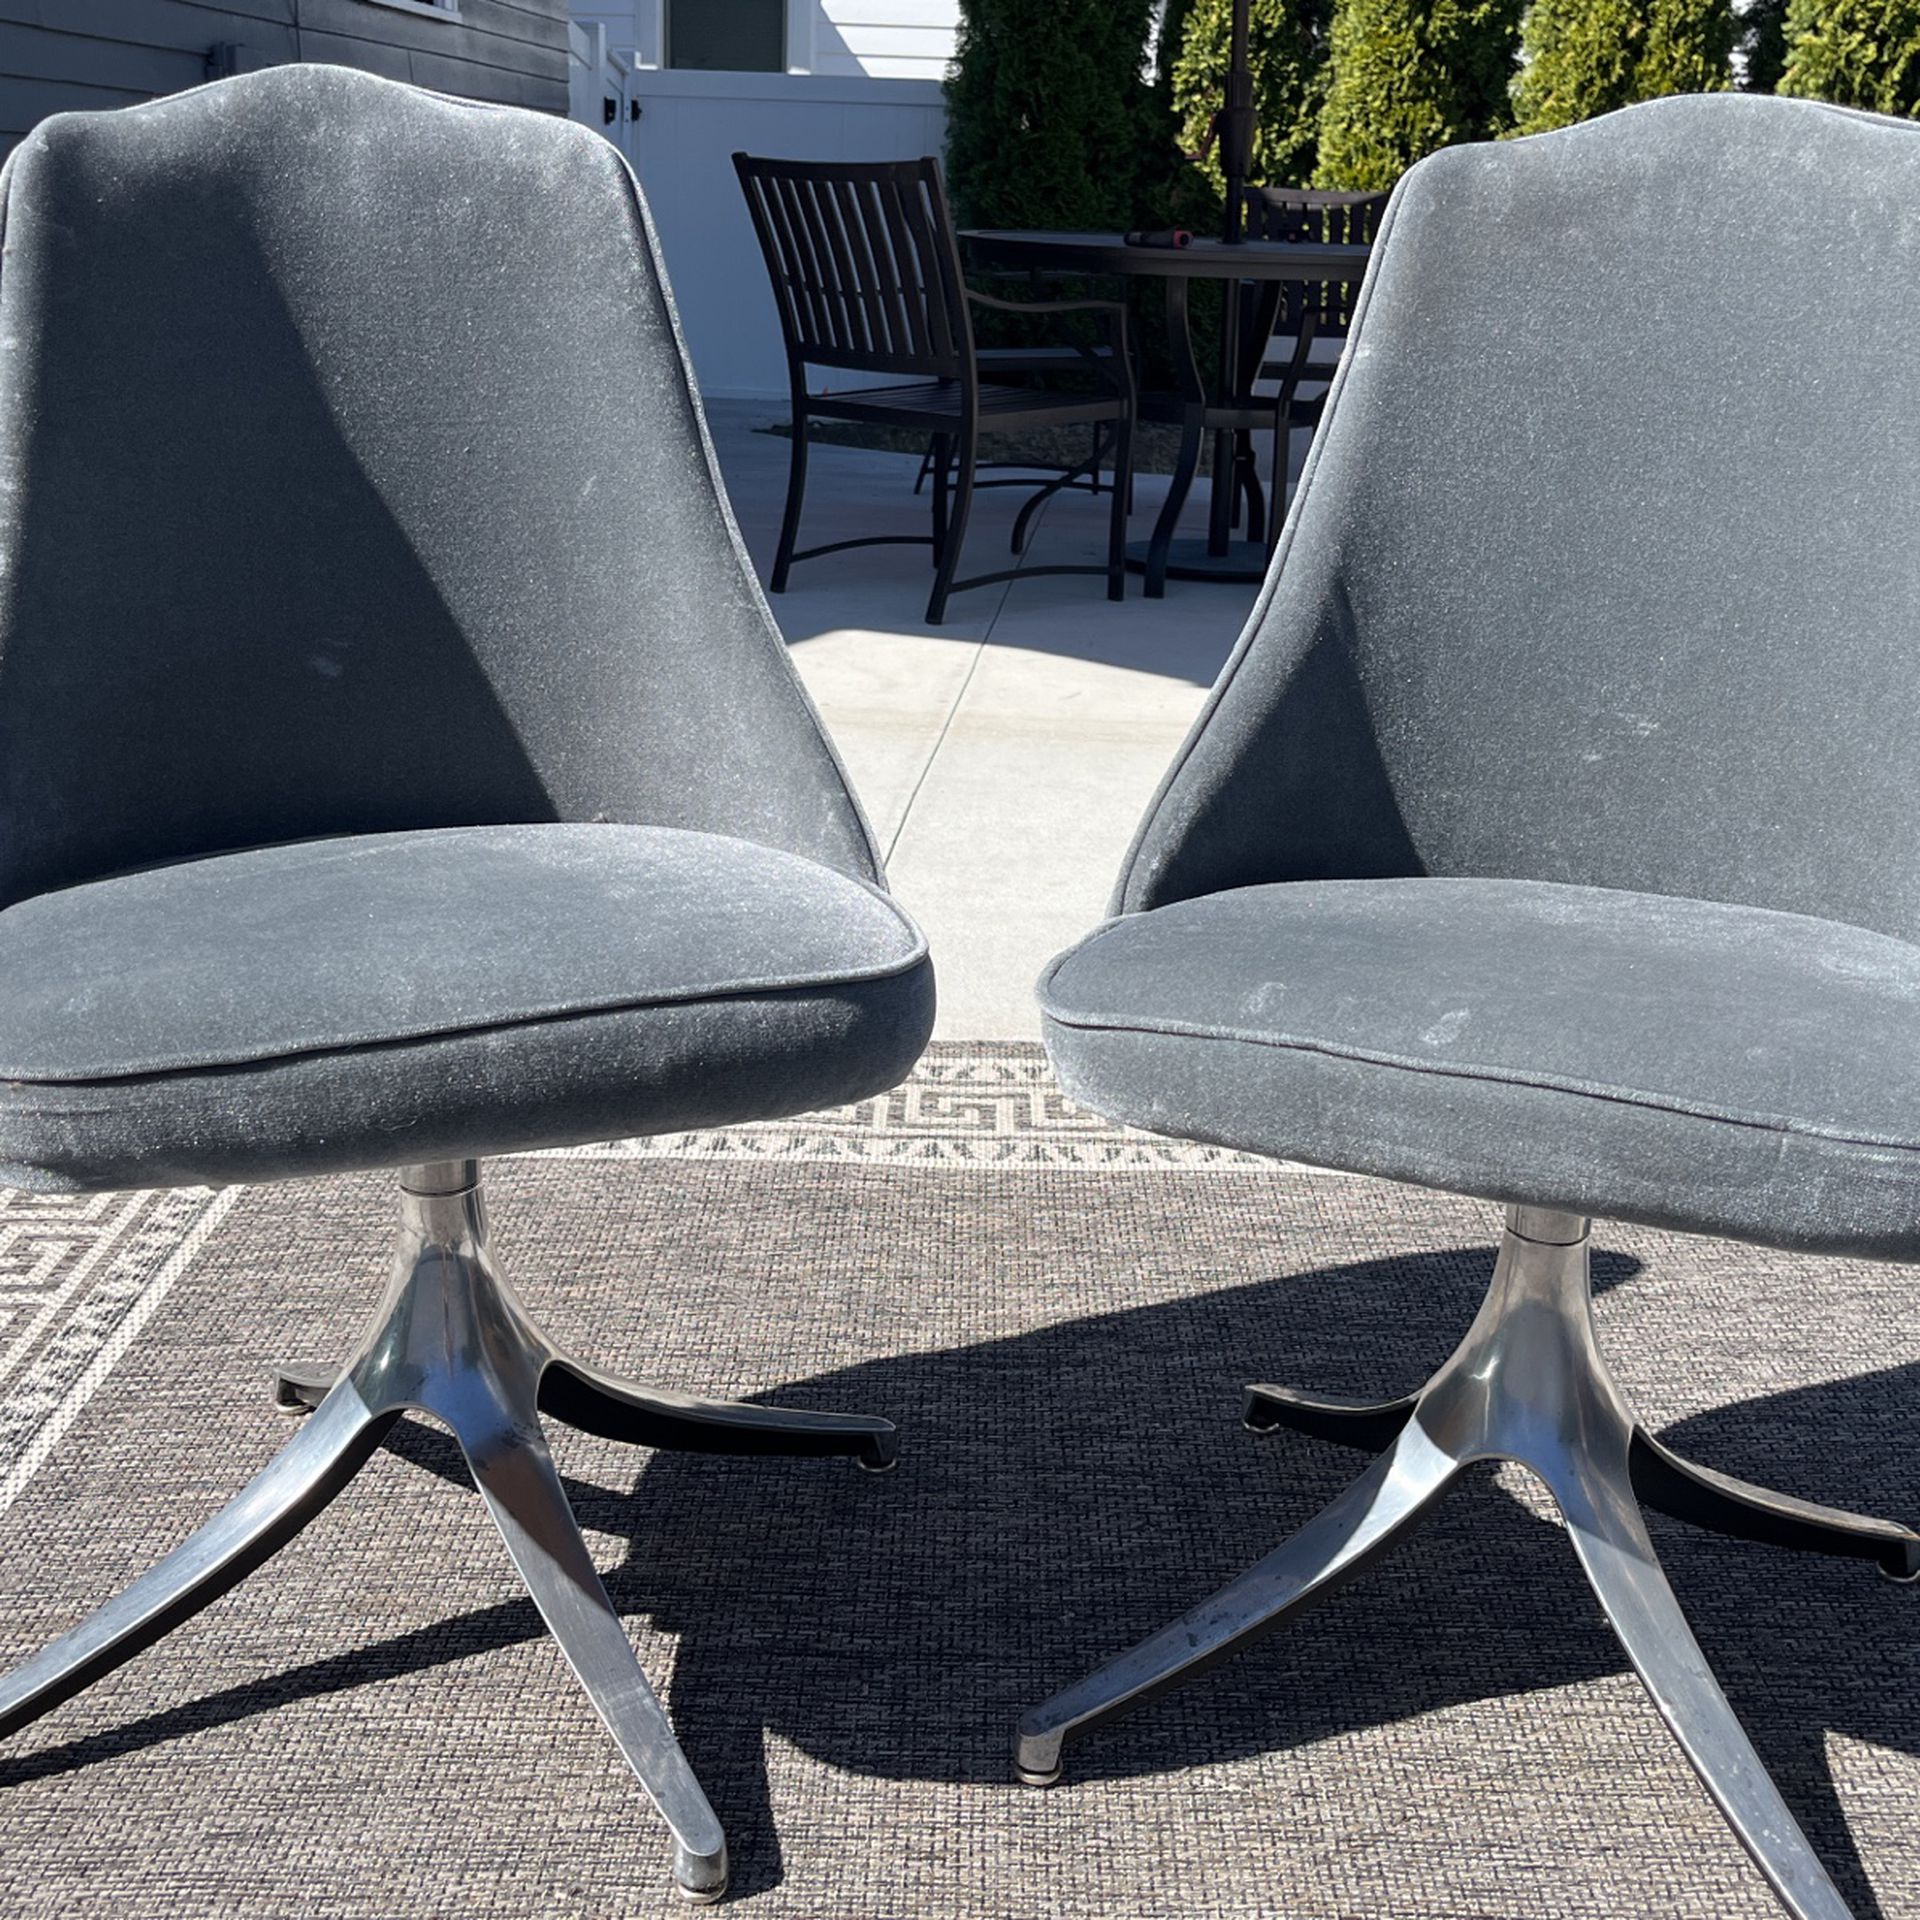 Vintage Contemporary Chairs $75 For The Pair 